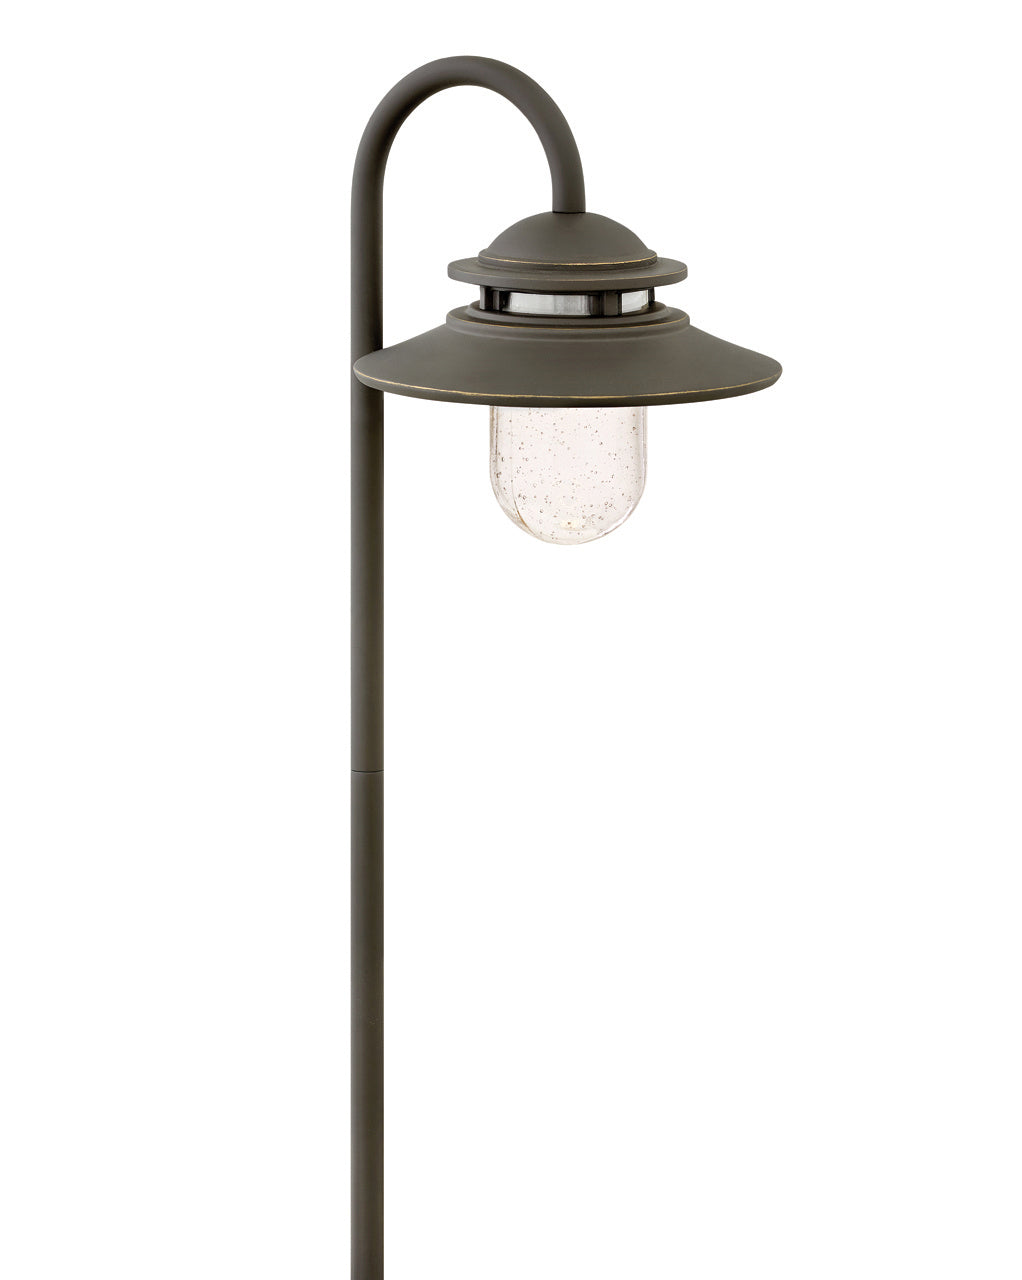 Hinkley - 1566OZ-LL - LED Path Light - Atwell - Oil Rubbed Bronze